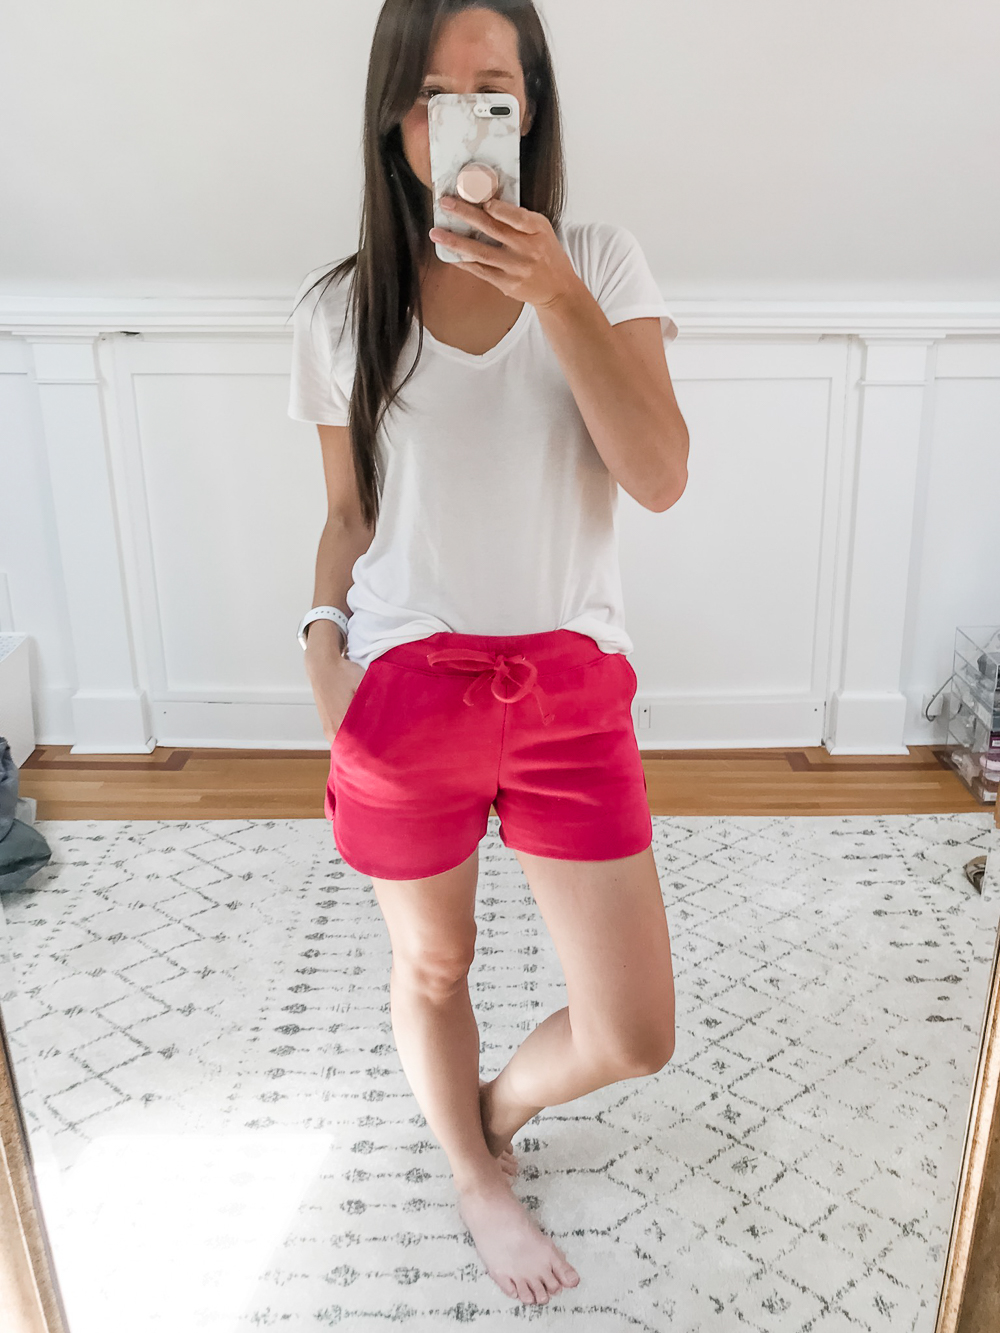 Amazon French Terry Fleece Shorts, Amazon Prime Day Try-On Haul: Top Affordable Fashion Finds